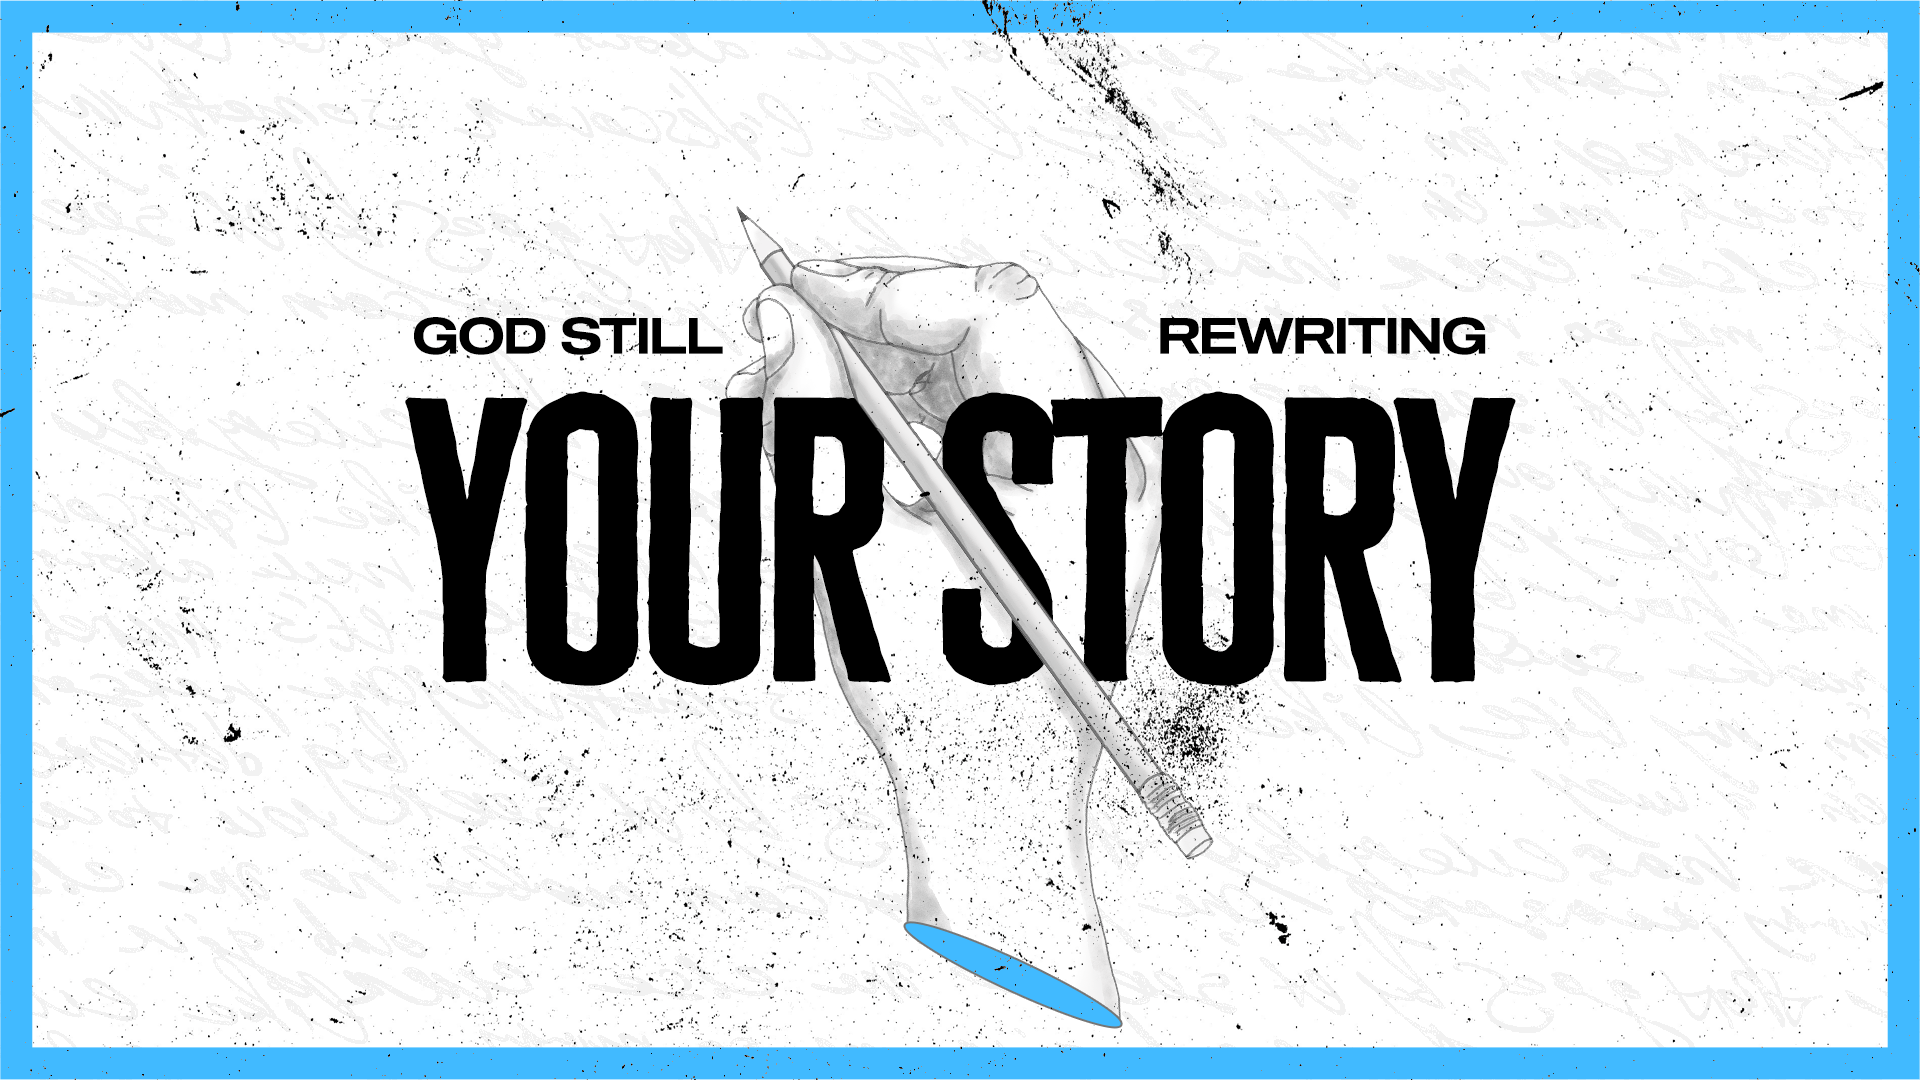 God is still rewriting your story